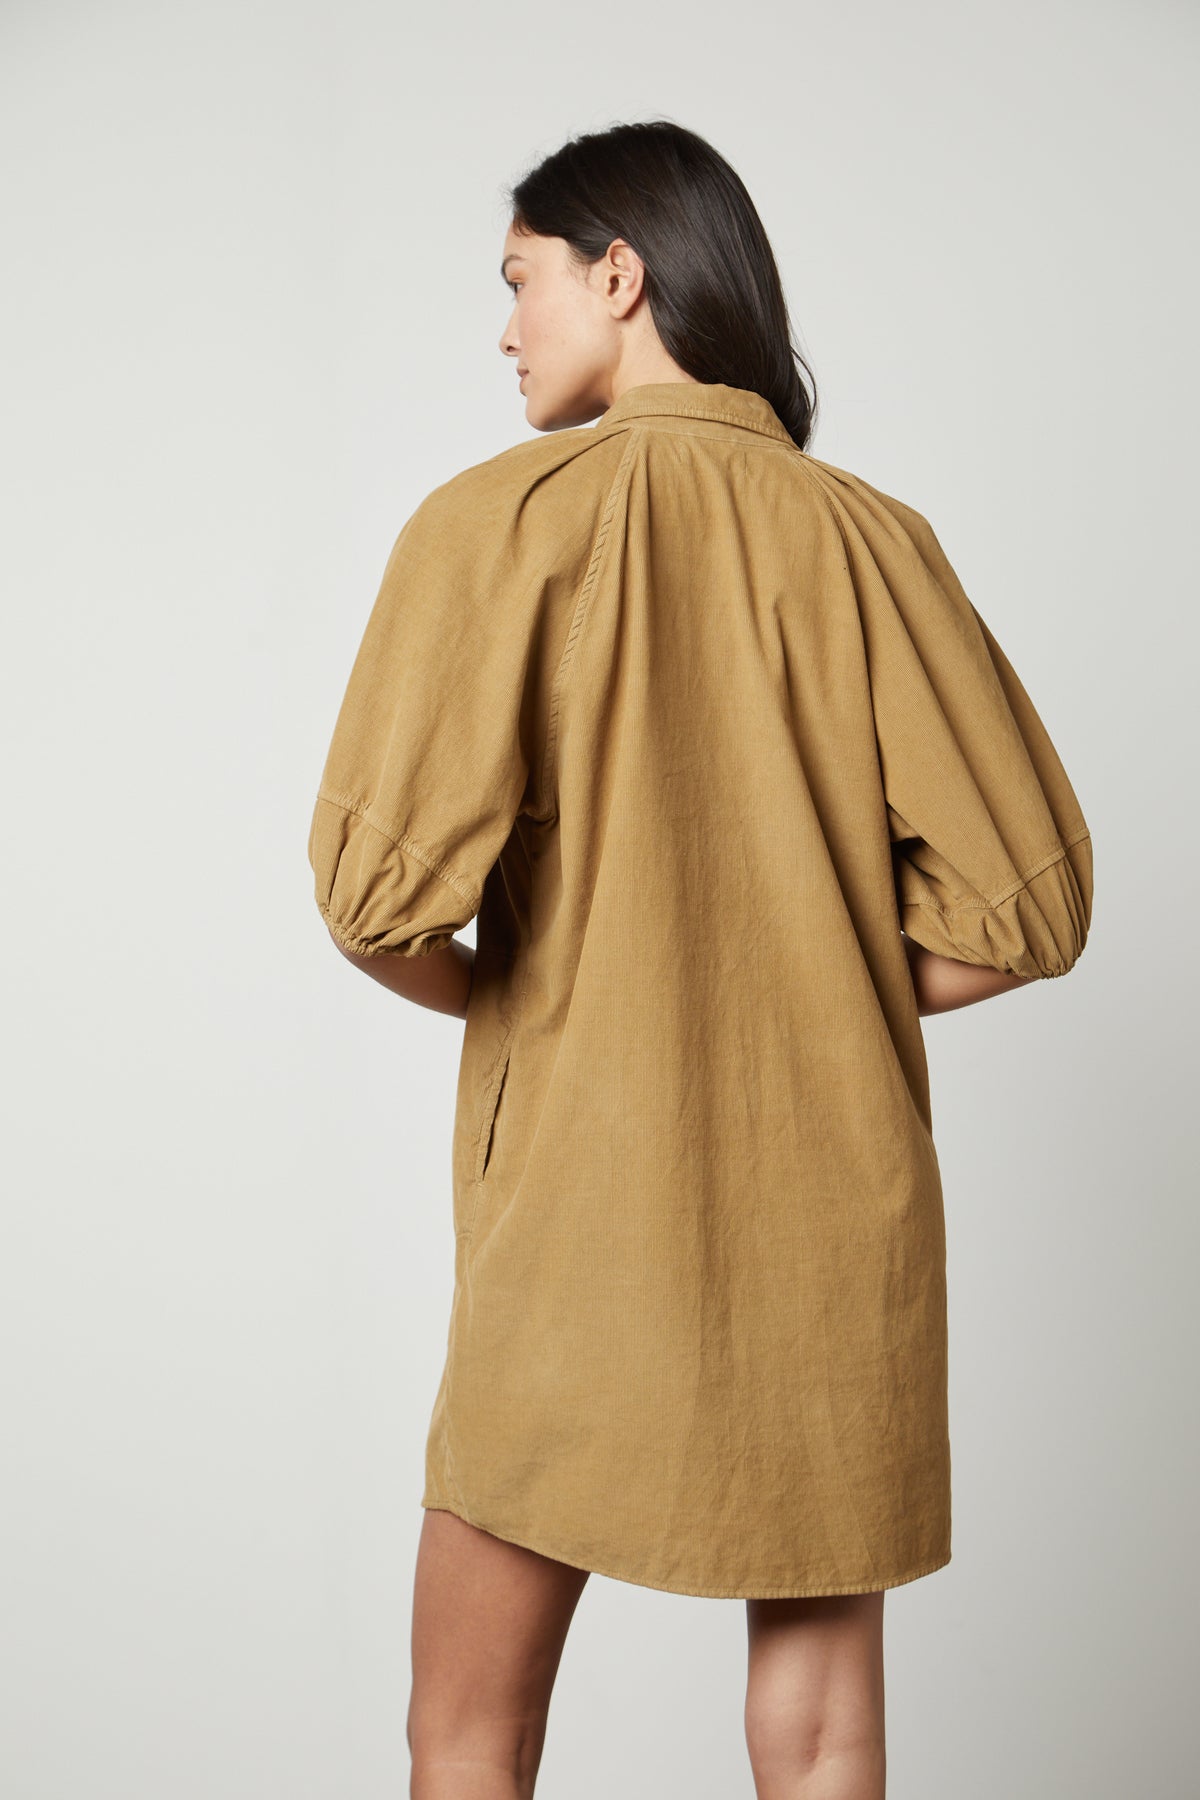 The back view of a woman wearing a Velvet by Graham & Spencer KADY CORDUROY BUTTON-UP DRESS.-26727742079169